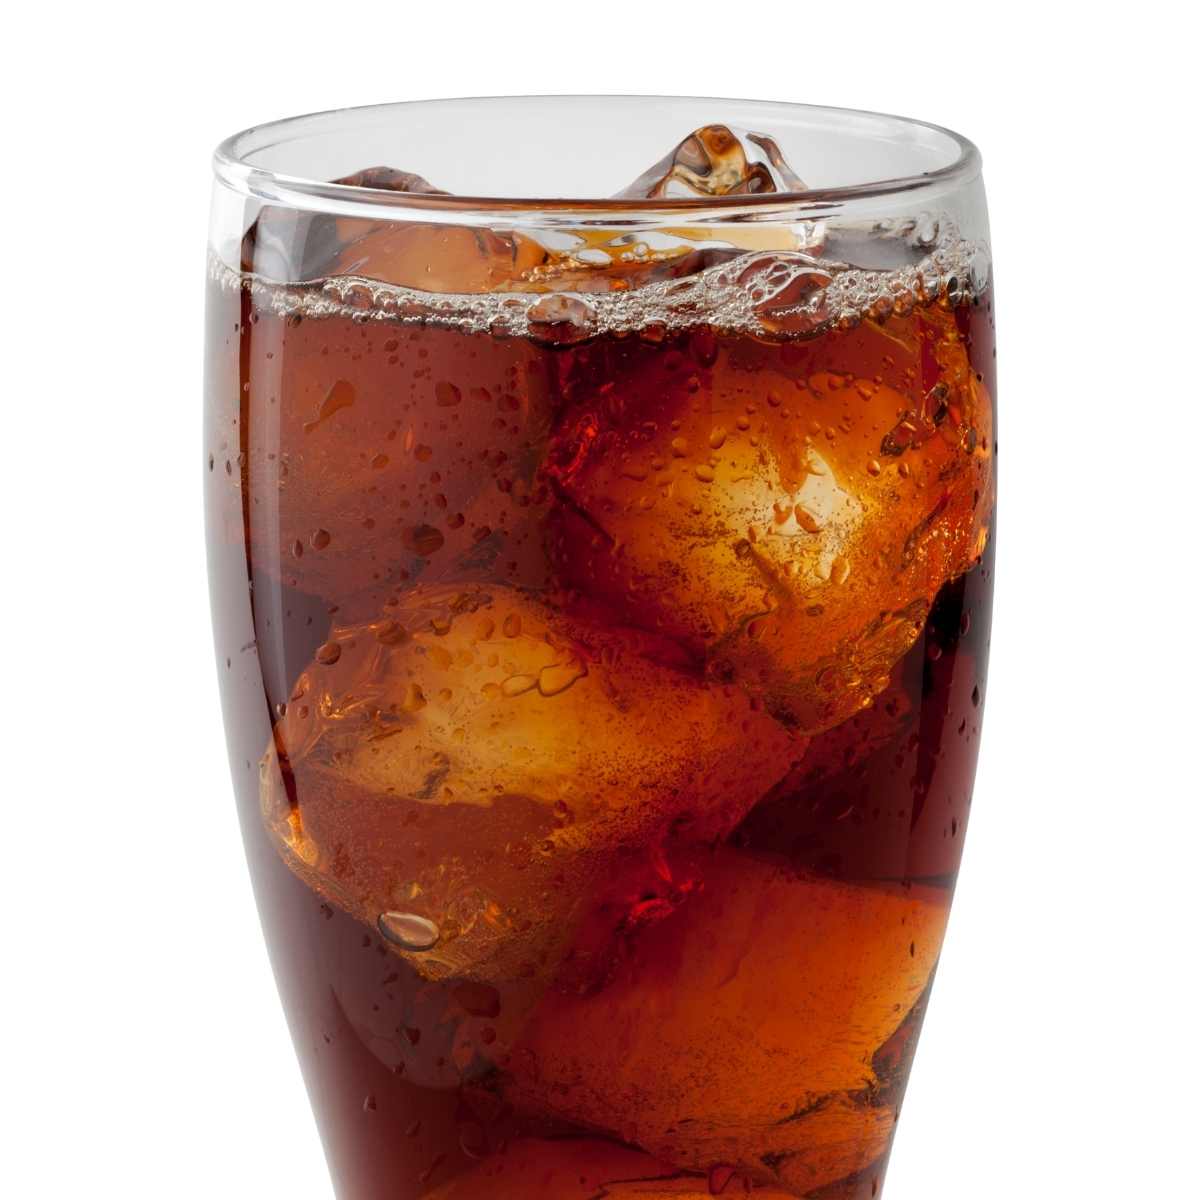 Soda in a glass with ice cubes.